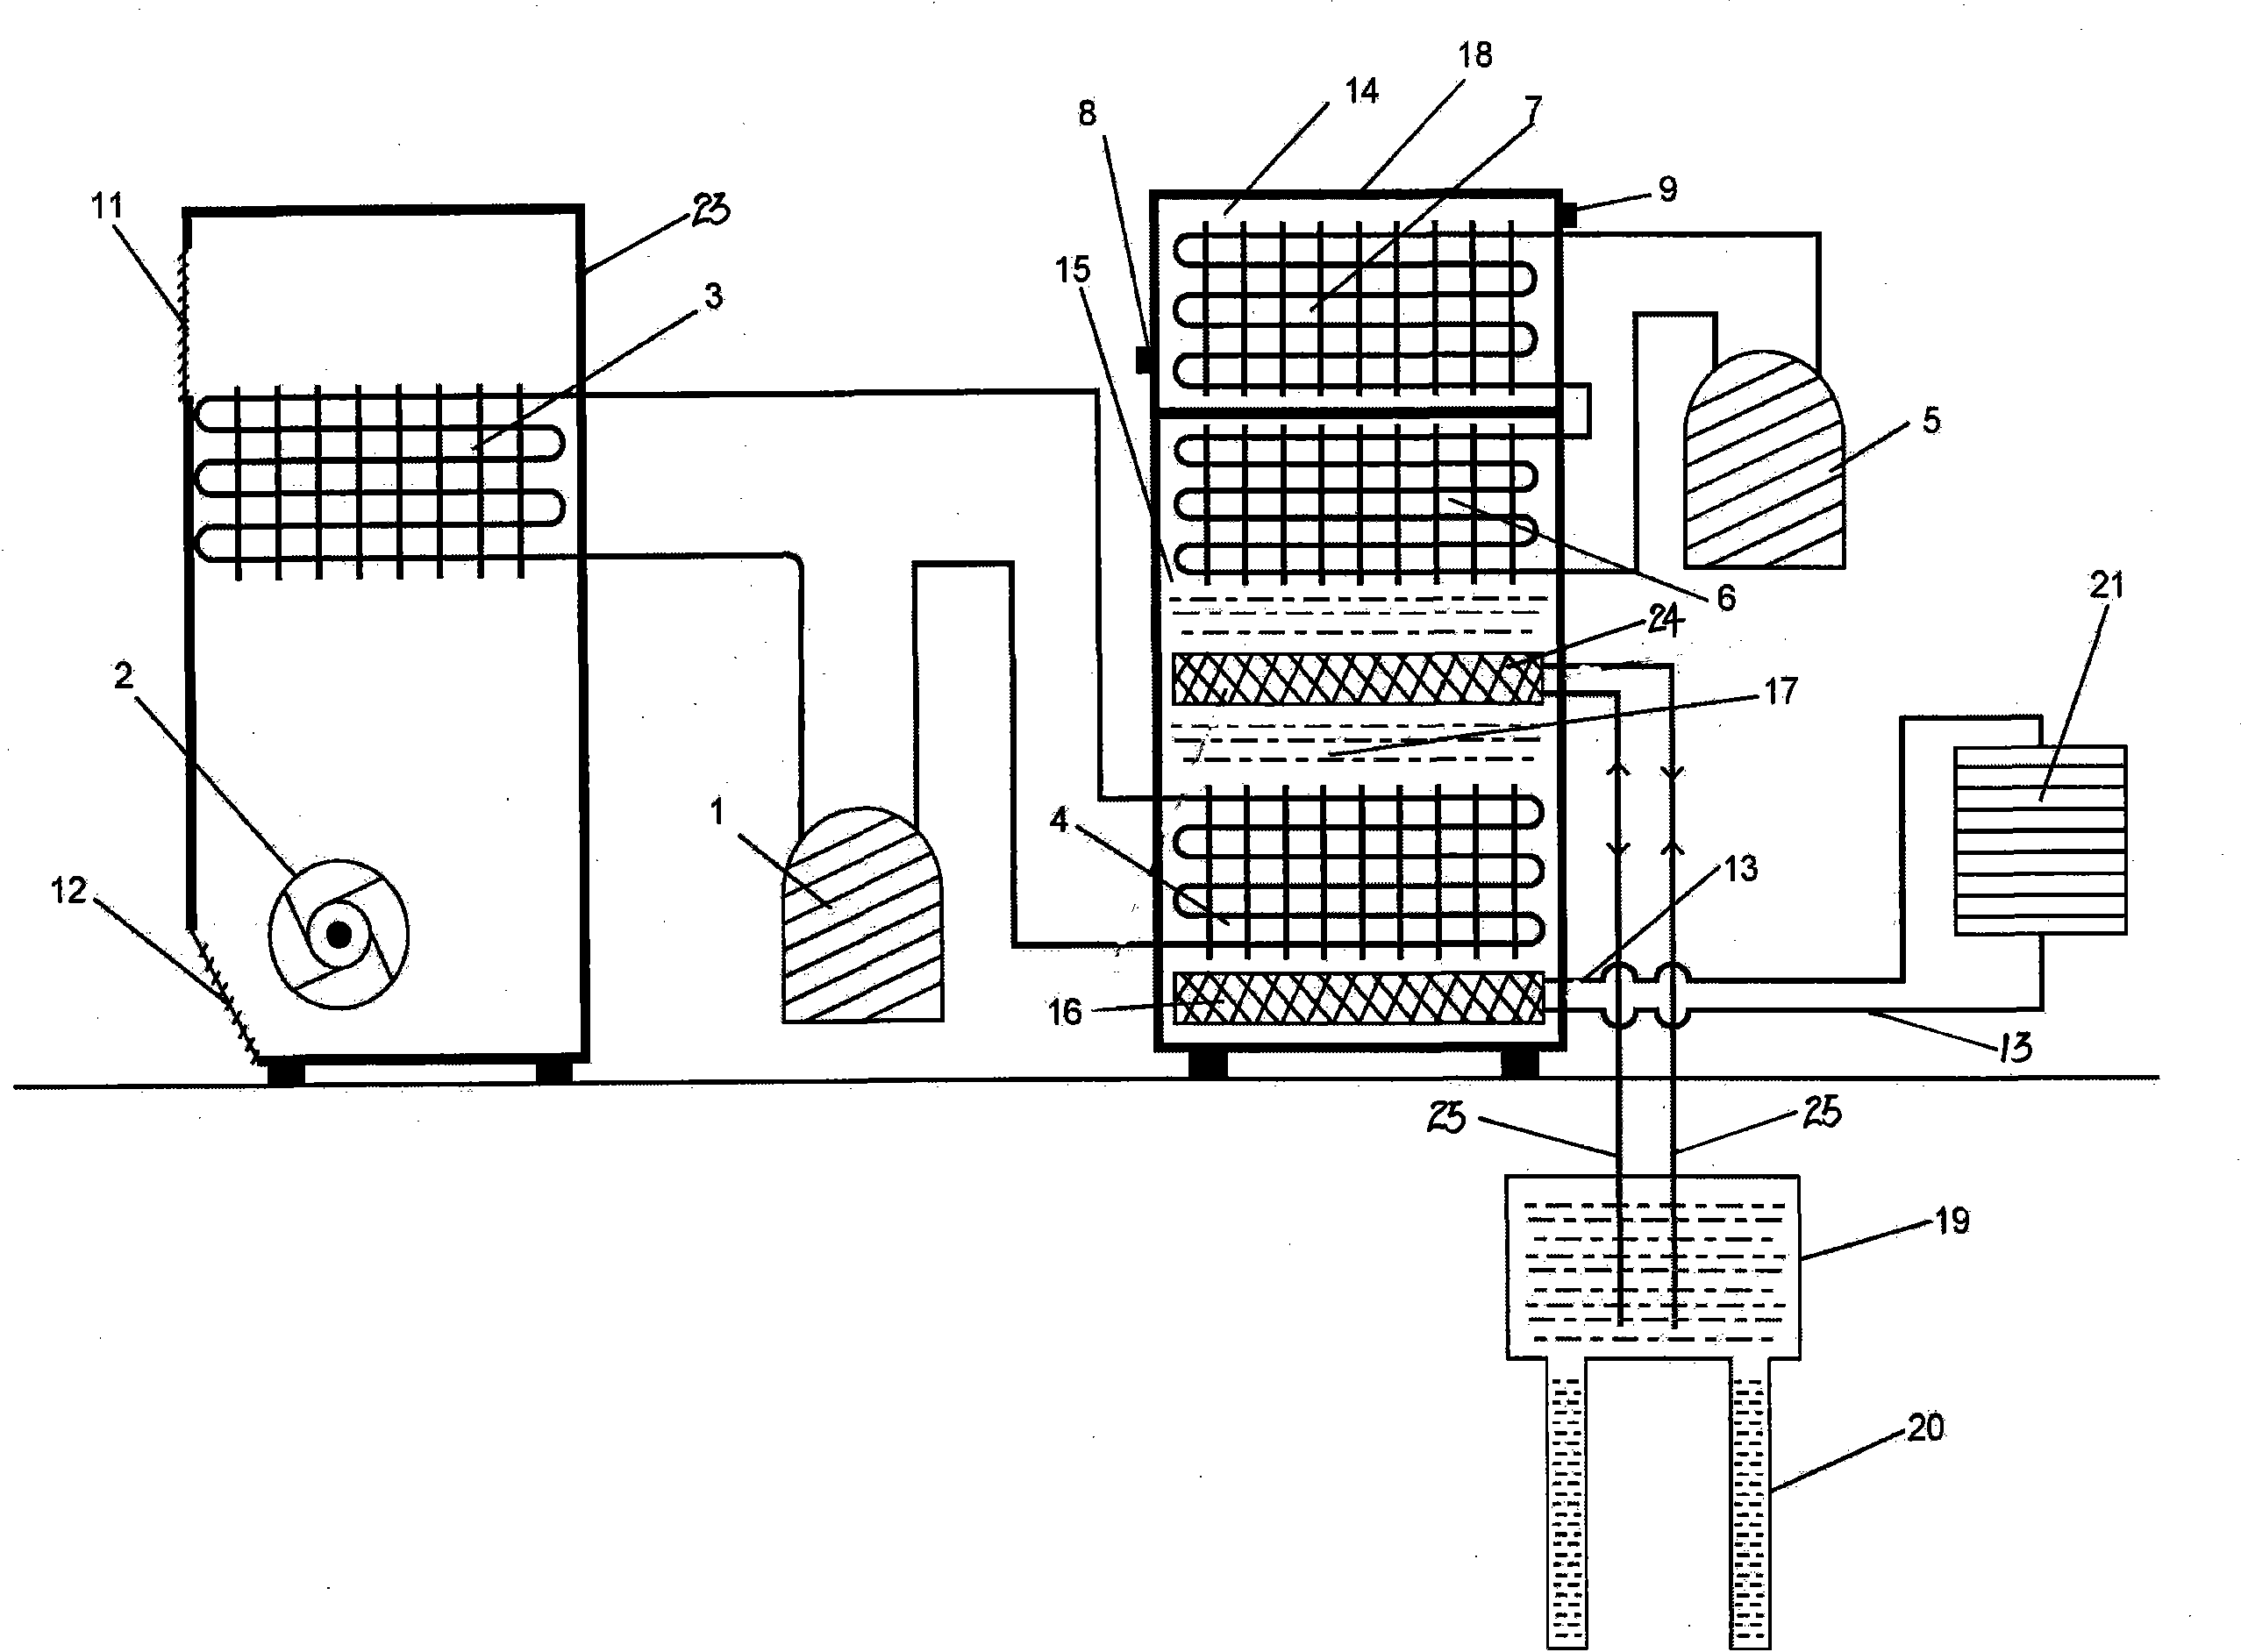 Water-cooled air conditioning and water heating system